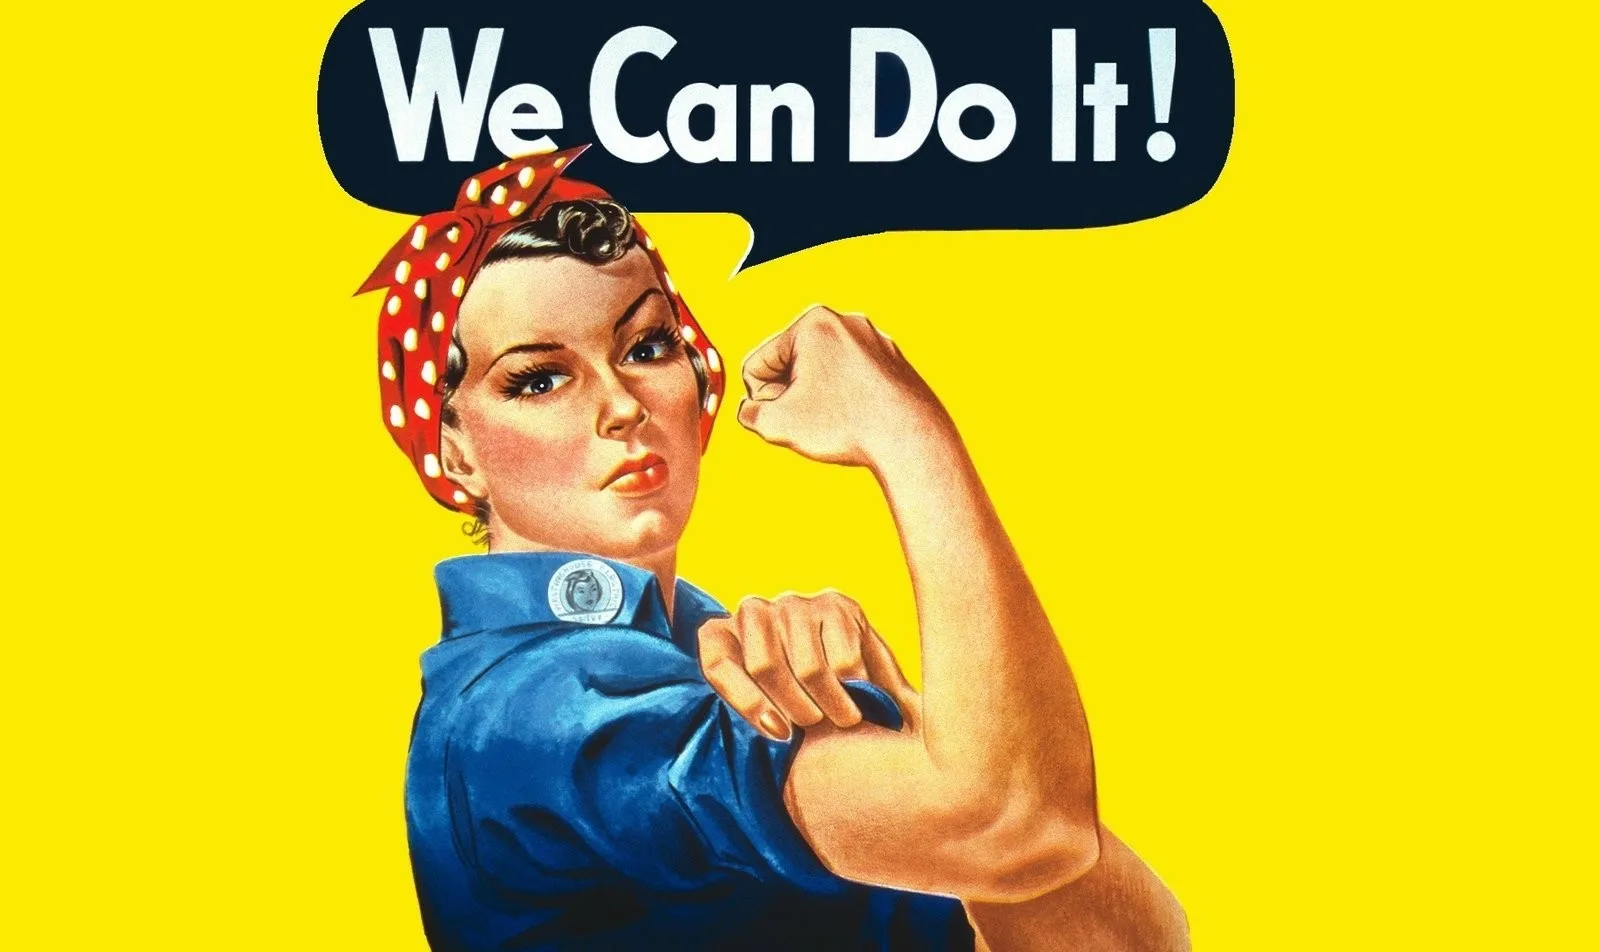 Modern we can. Yes we can do it плакат. Феминизм we can do it. Постер we can do it. You can do it плакат.